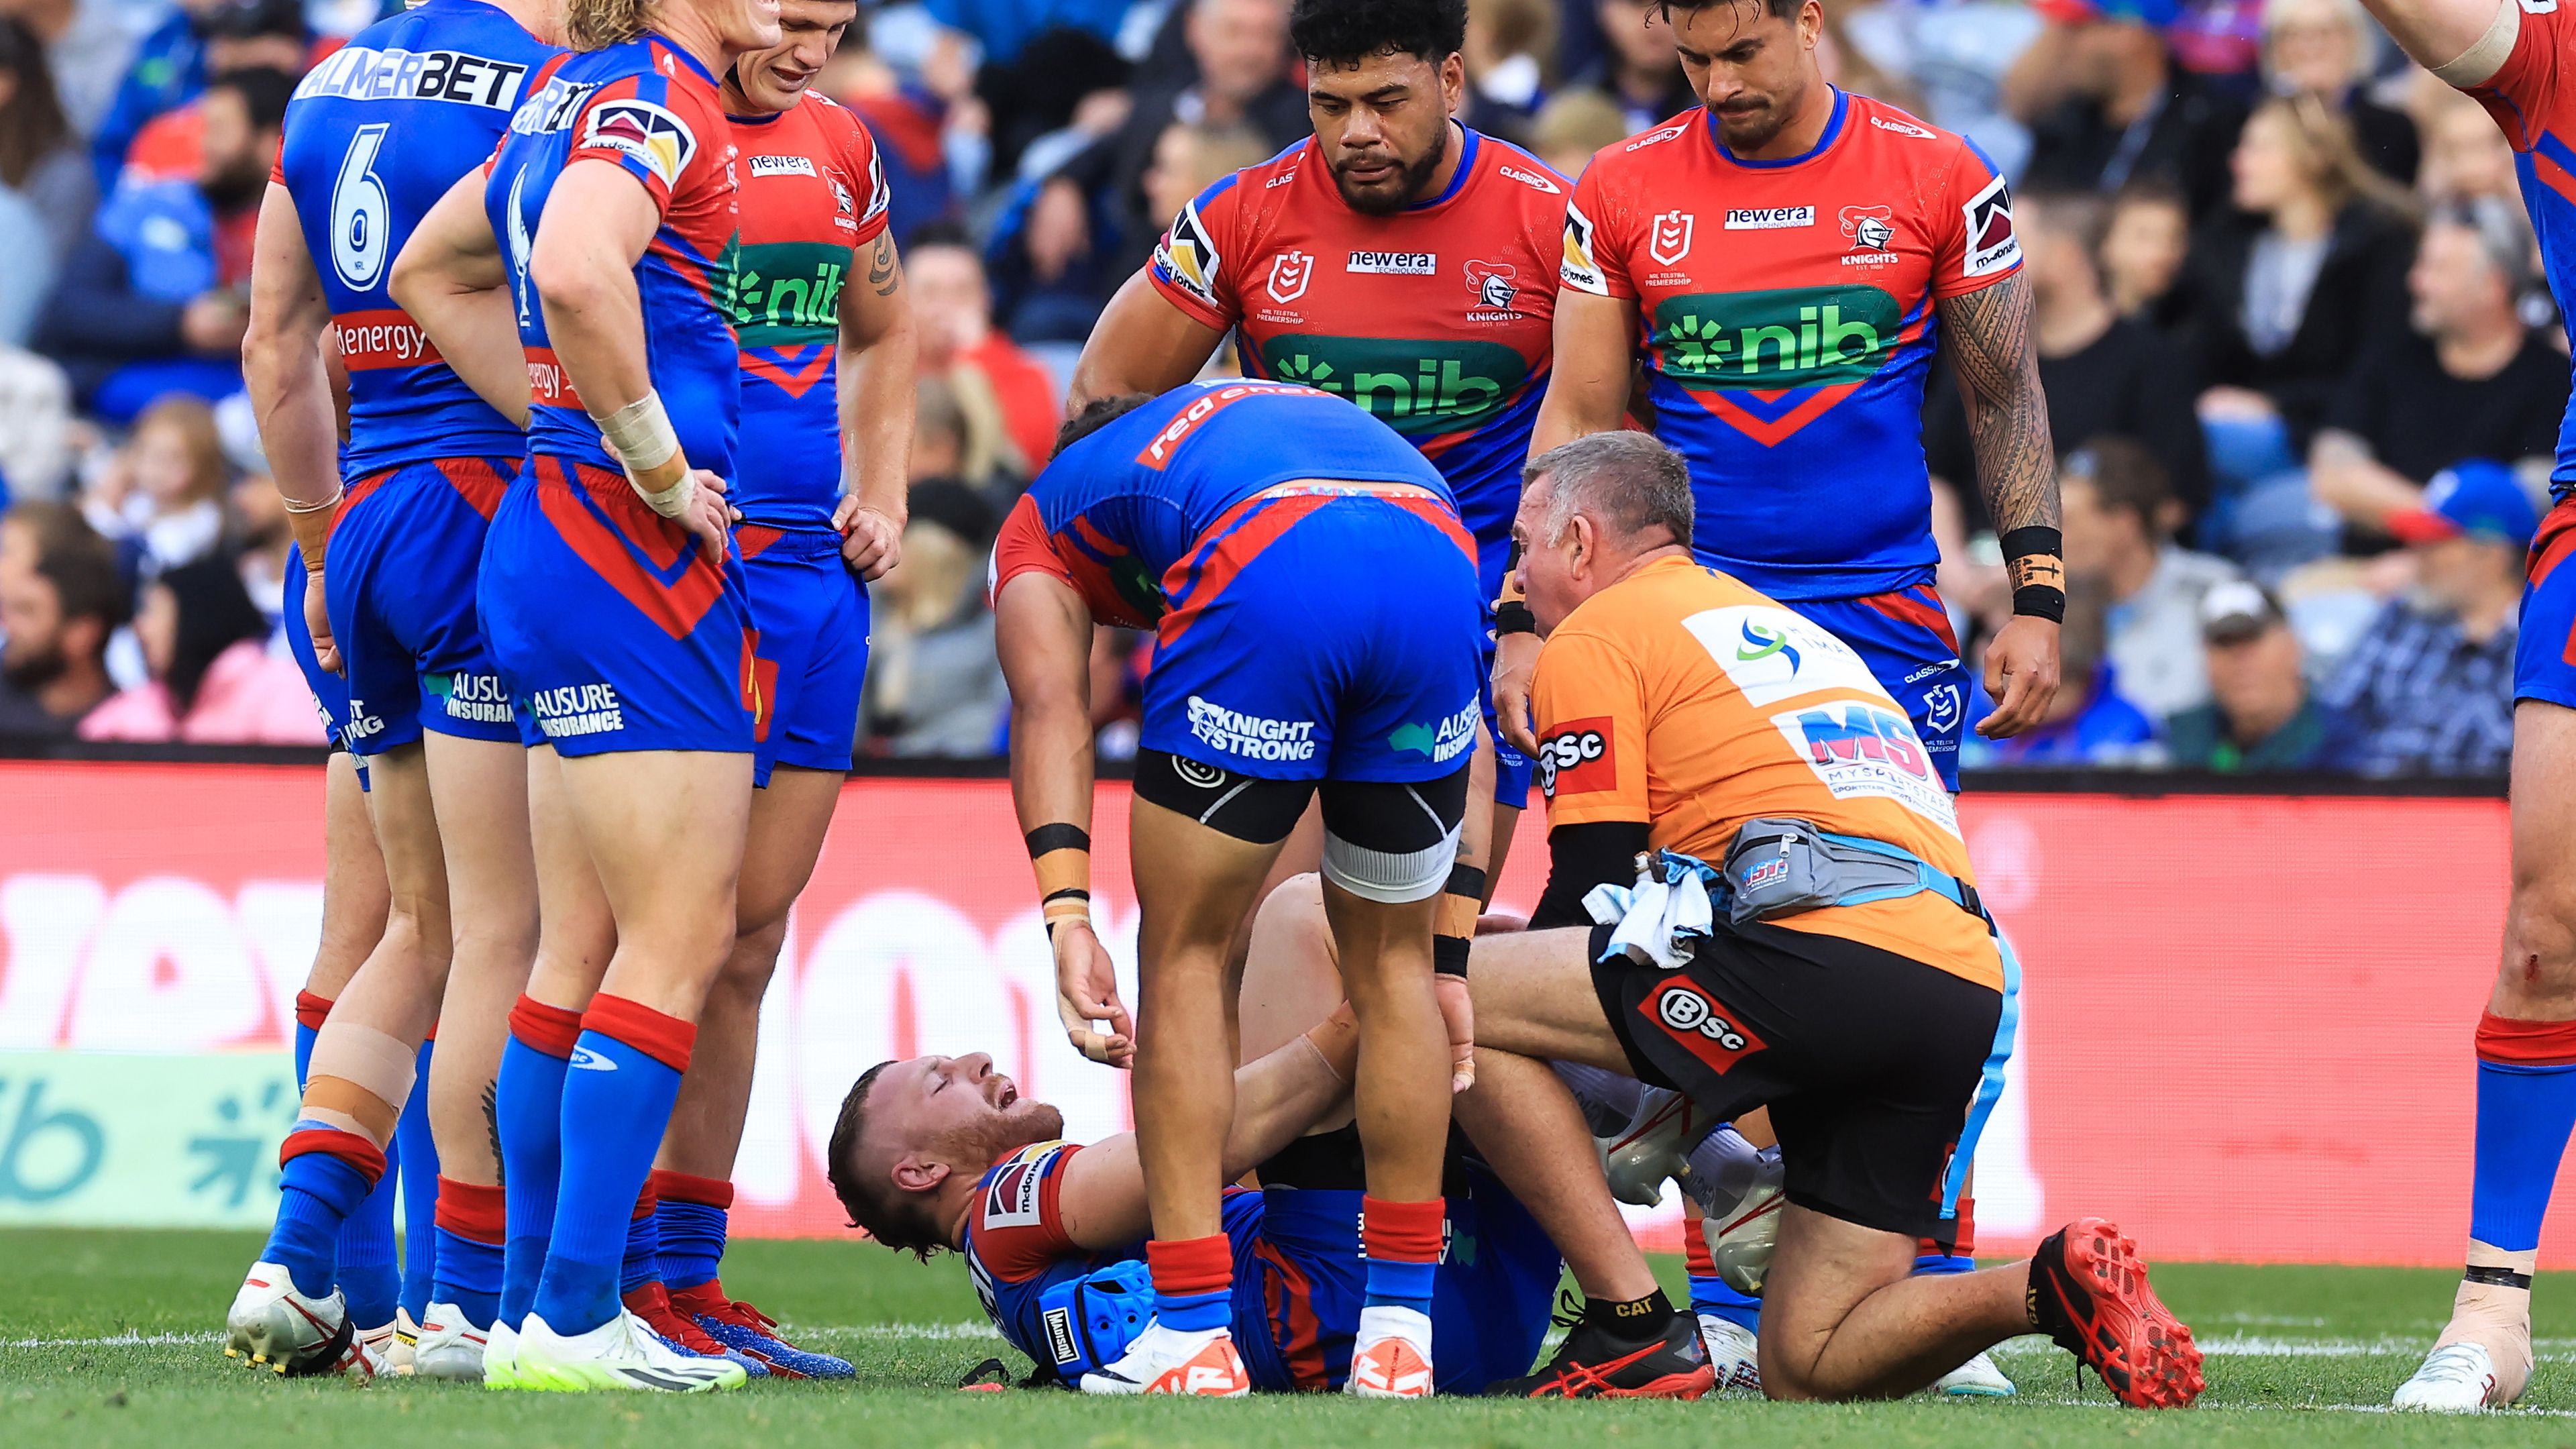 Young Bulldog's season could be over after 'textbook' hip-drop tackle floors Knights star